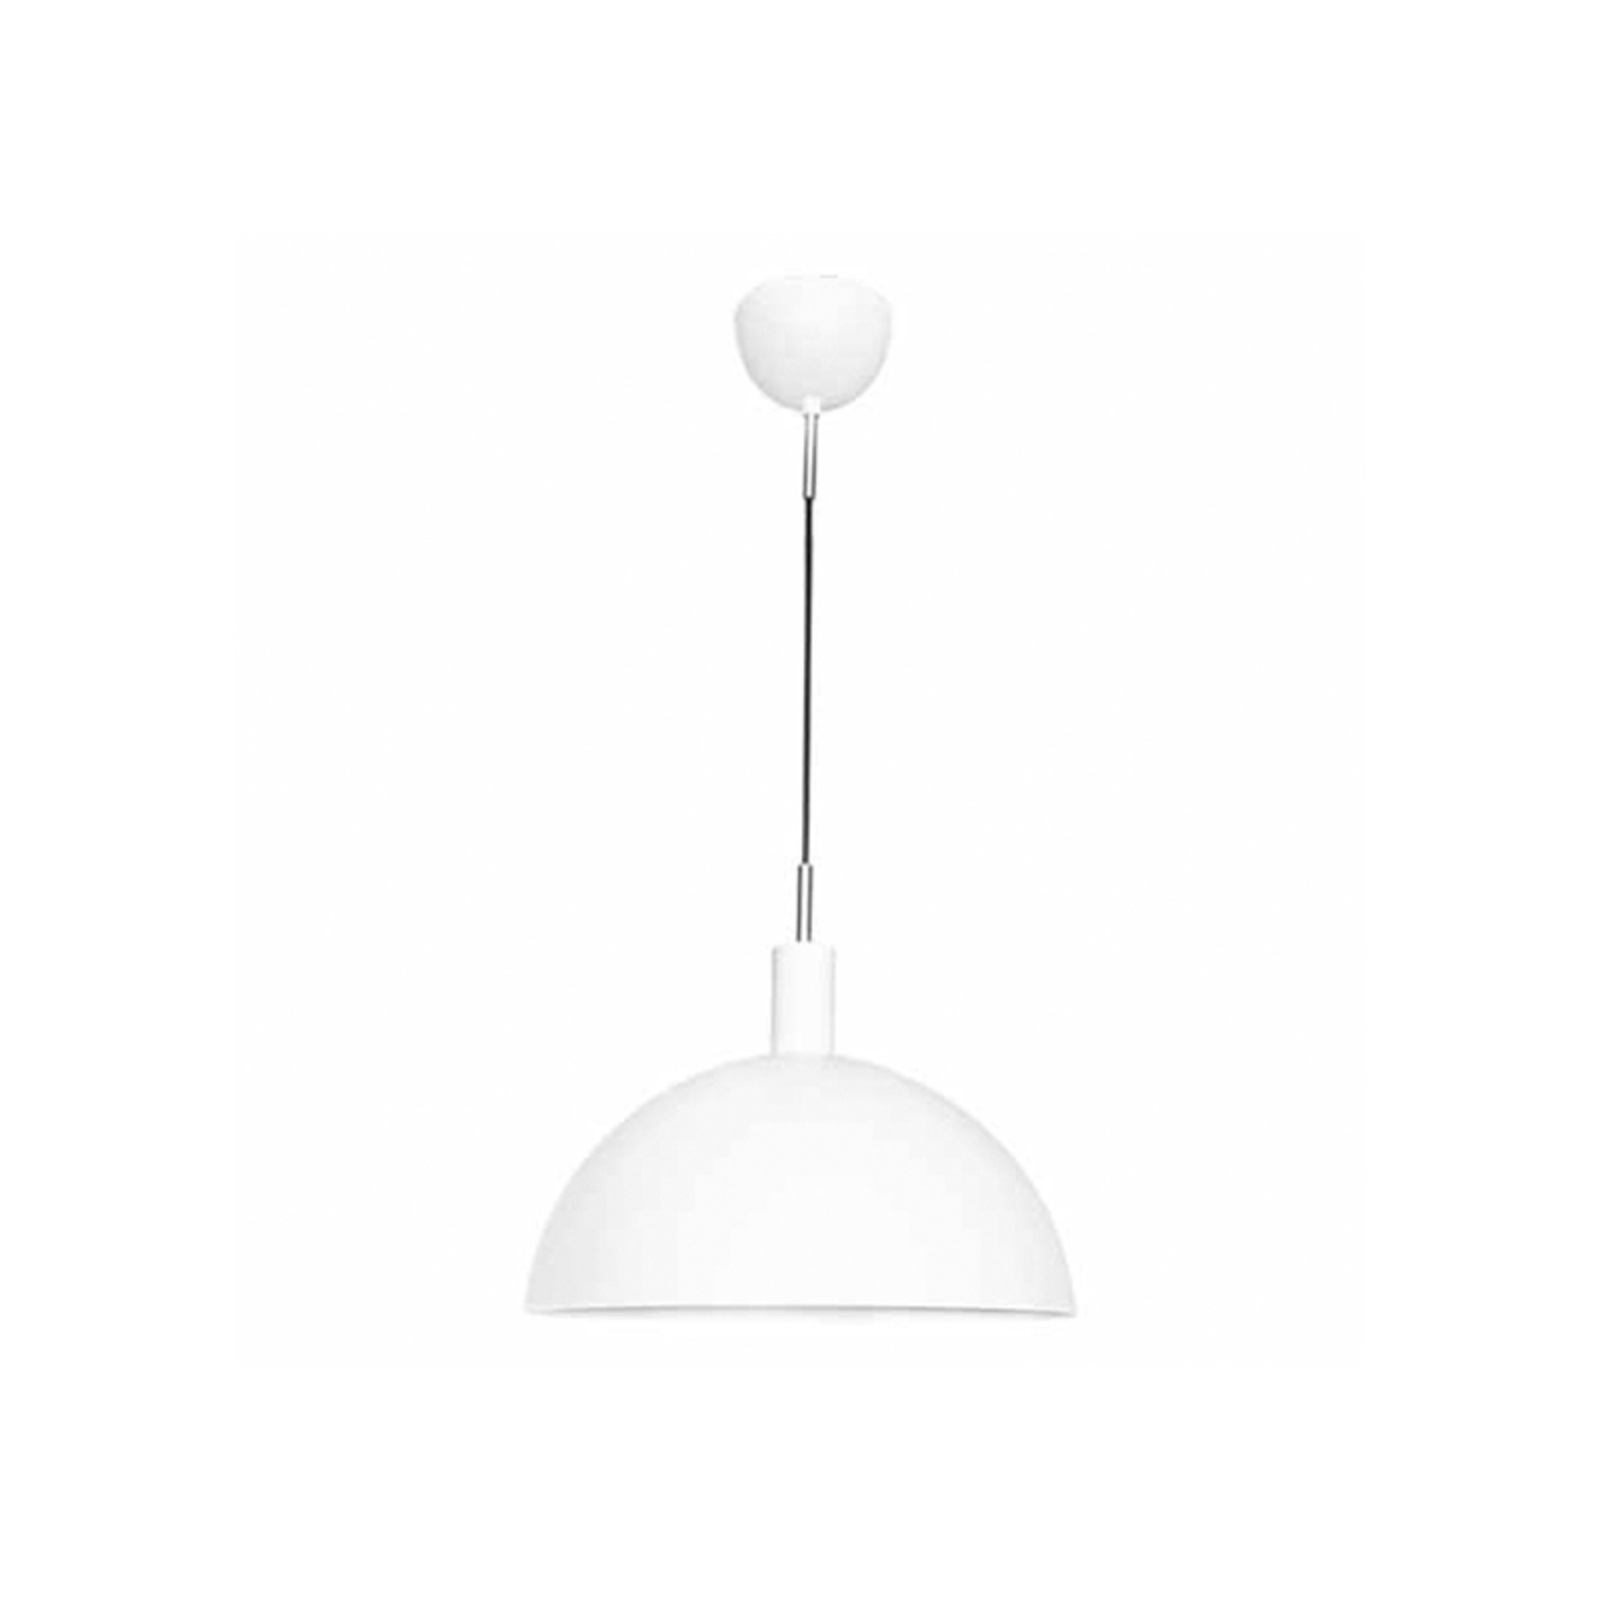 By Rydéns Cabano suspension, 1 lampe, blanche